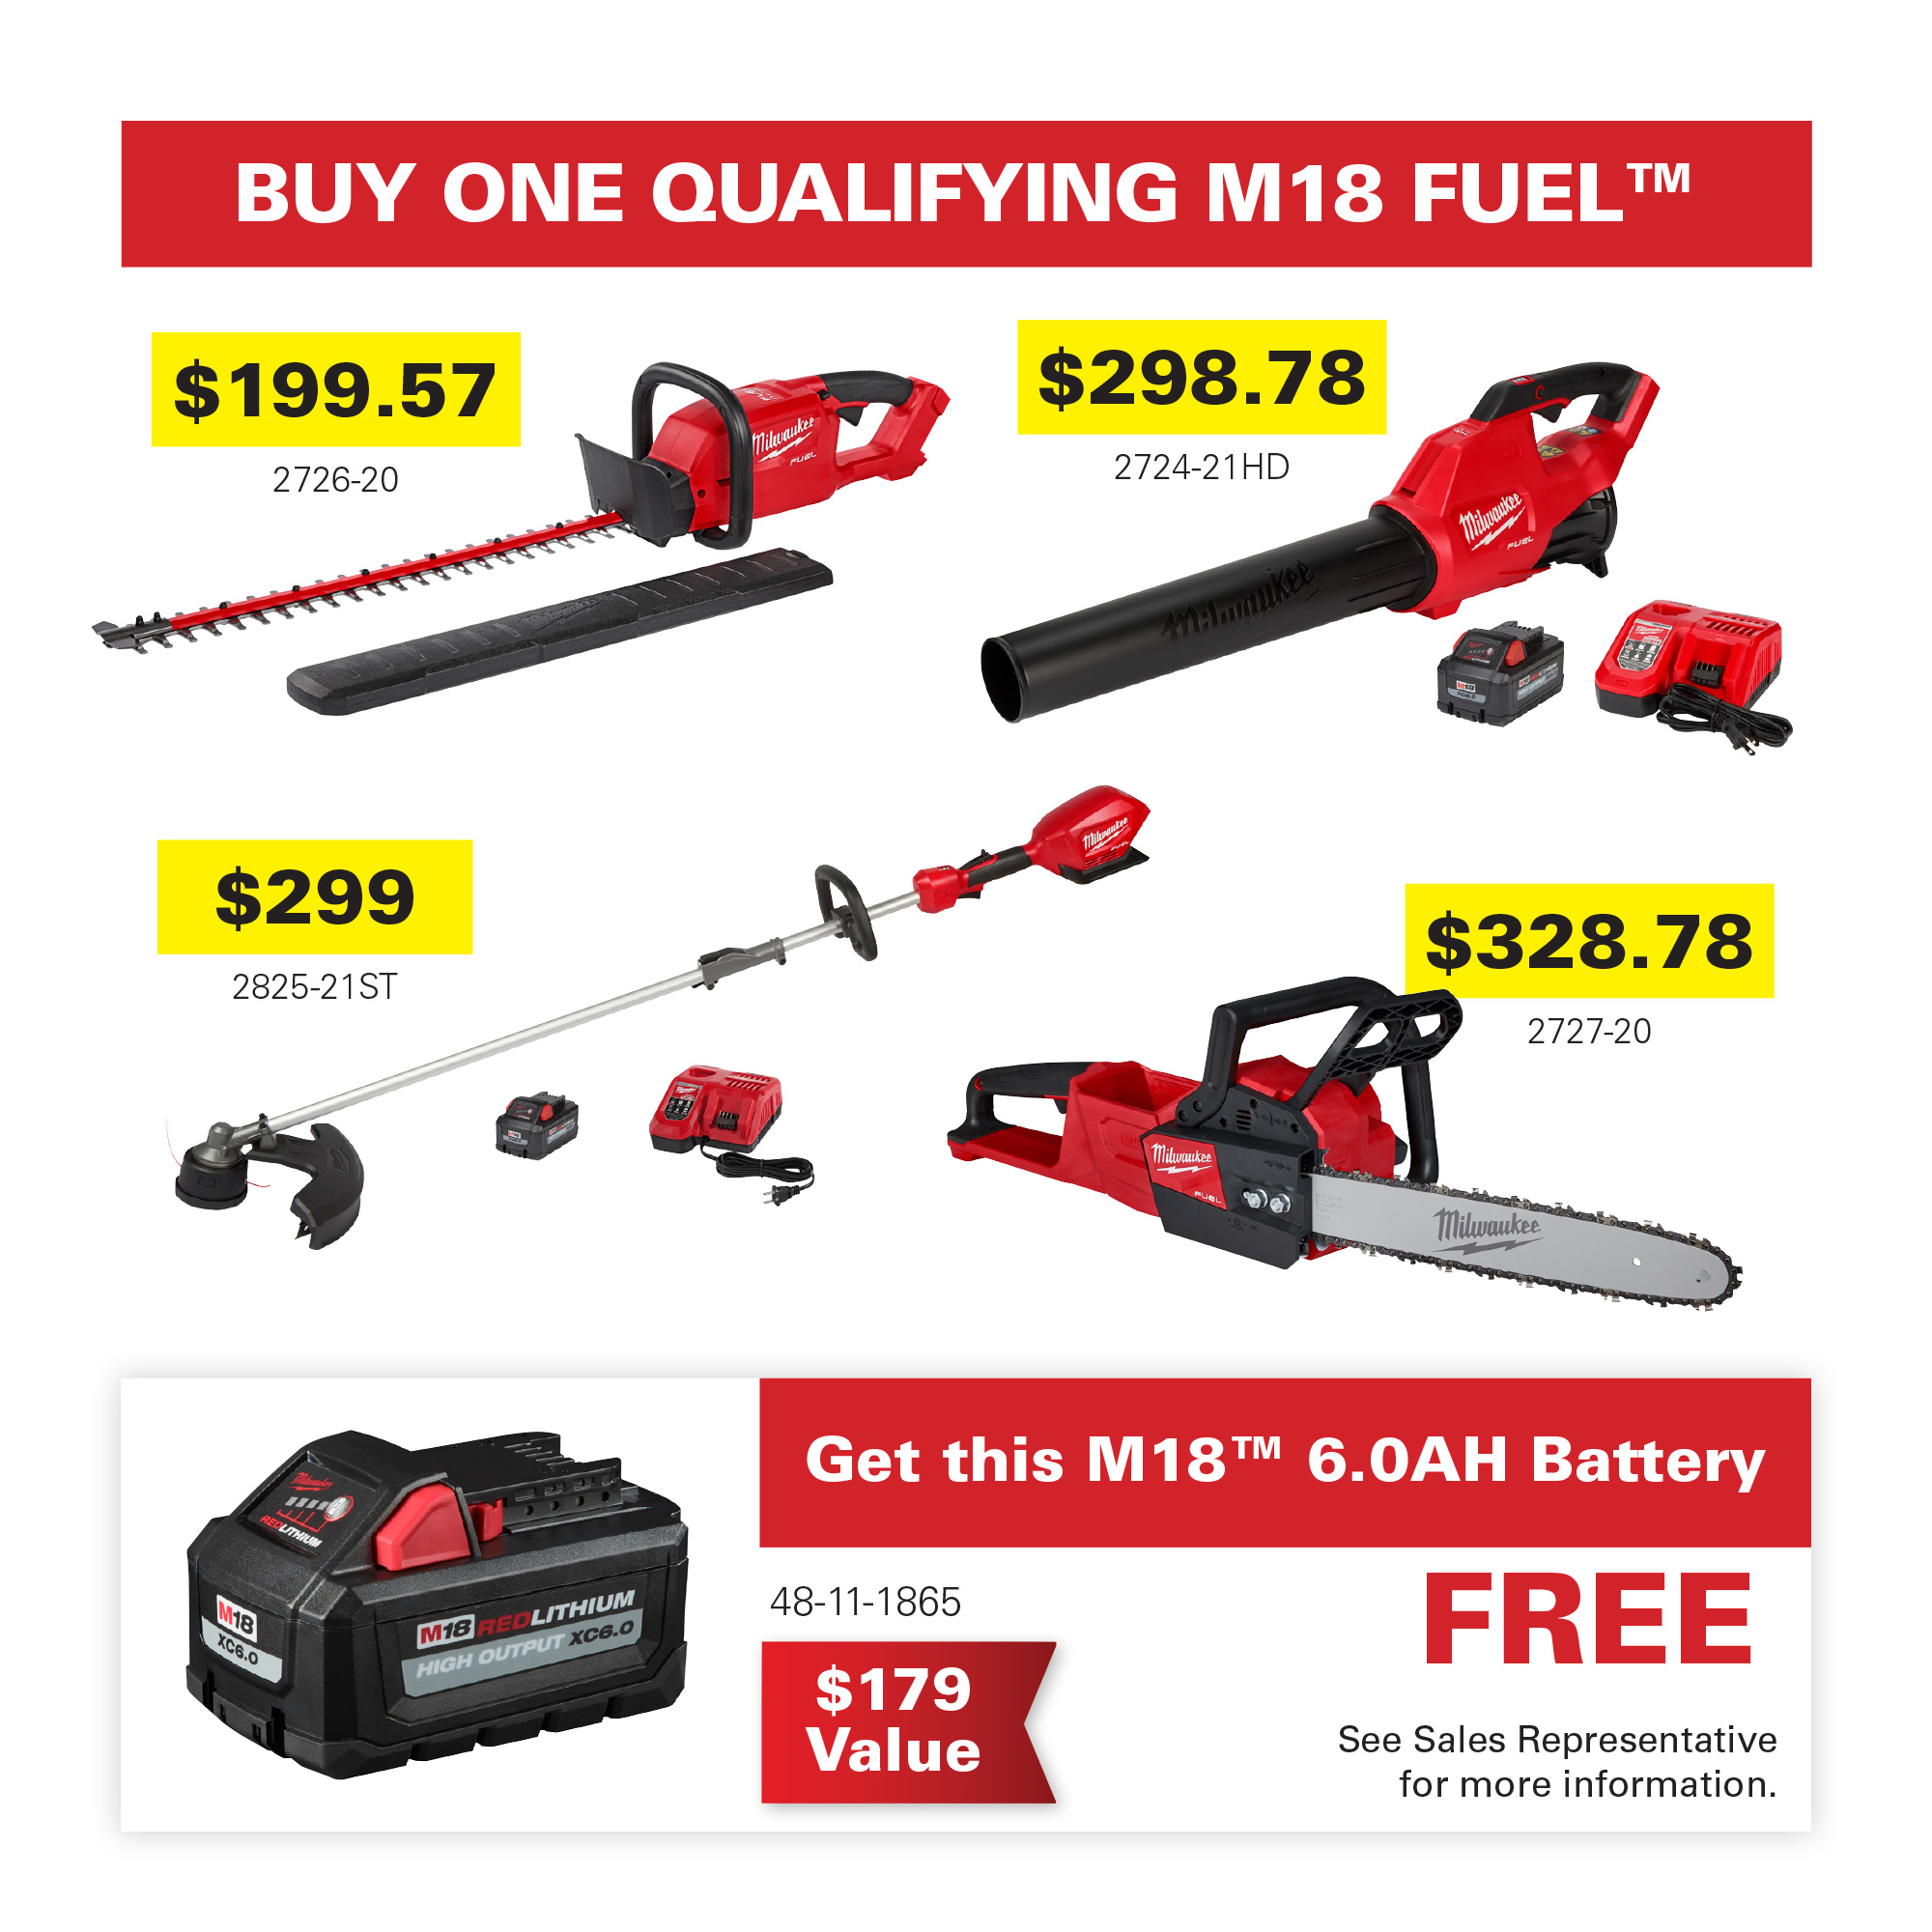 Buy Qualifying M18 Fuel Tool Get Free Battery